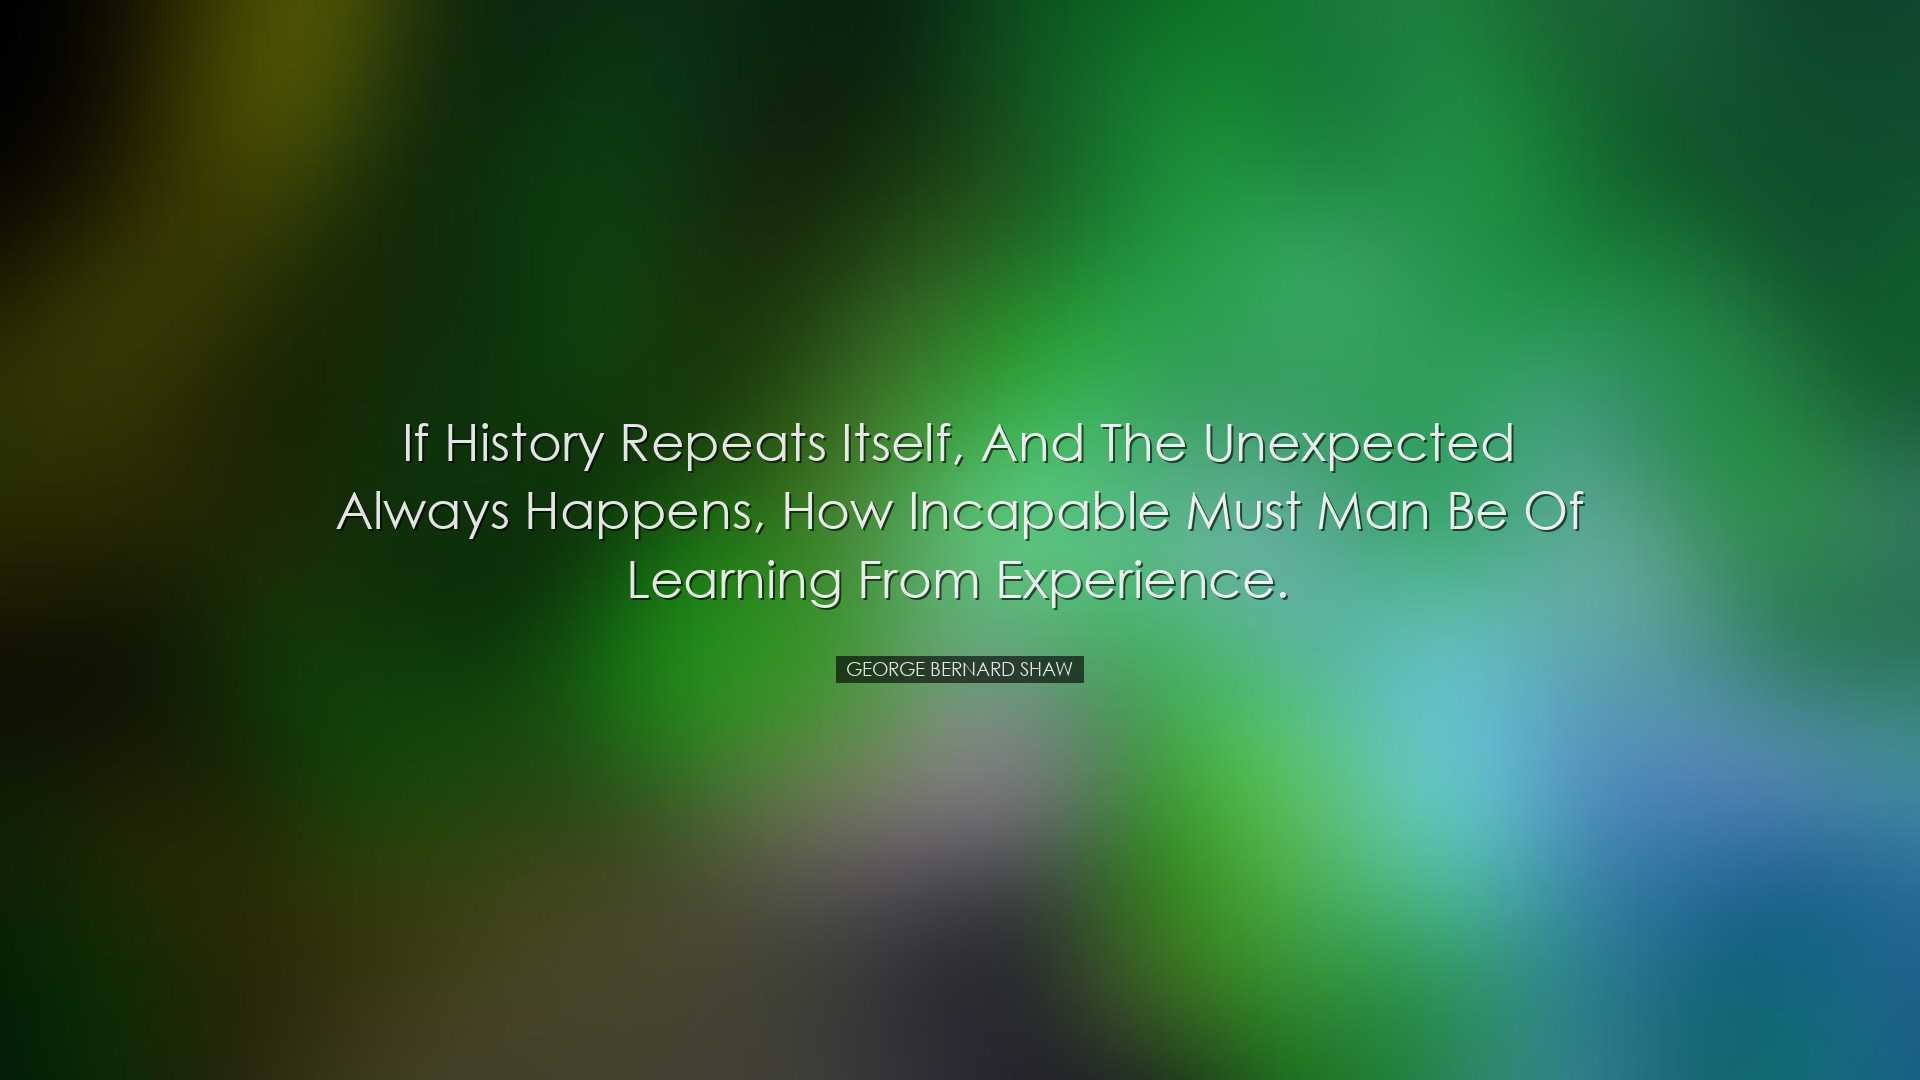 If history repeats itself, and the unexpected always happens, how